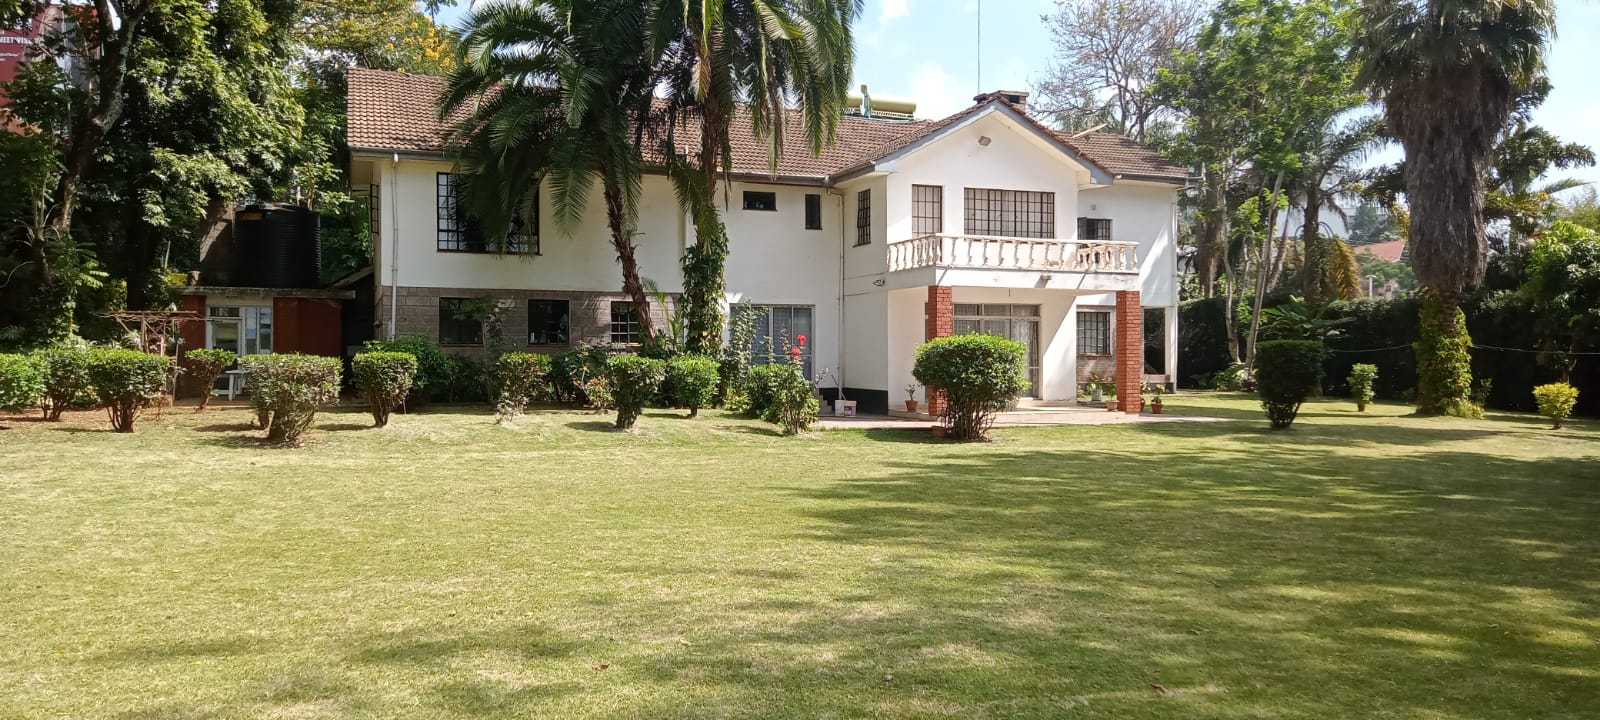 4 Bedroom House built on 34 acres in Gigiri for Rent at Ksh450k with tv room, study terraces, well kept garden and more amenitie (18)